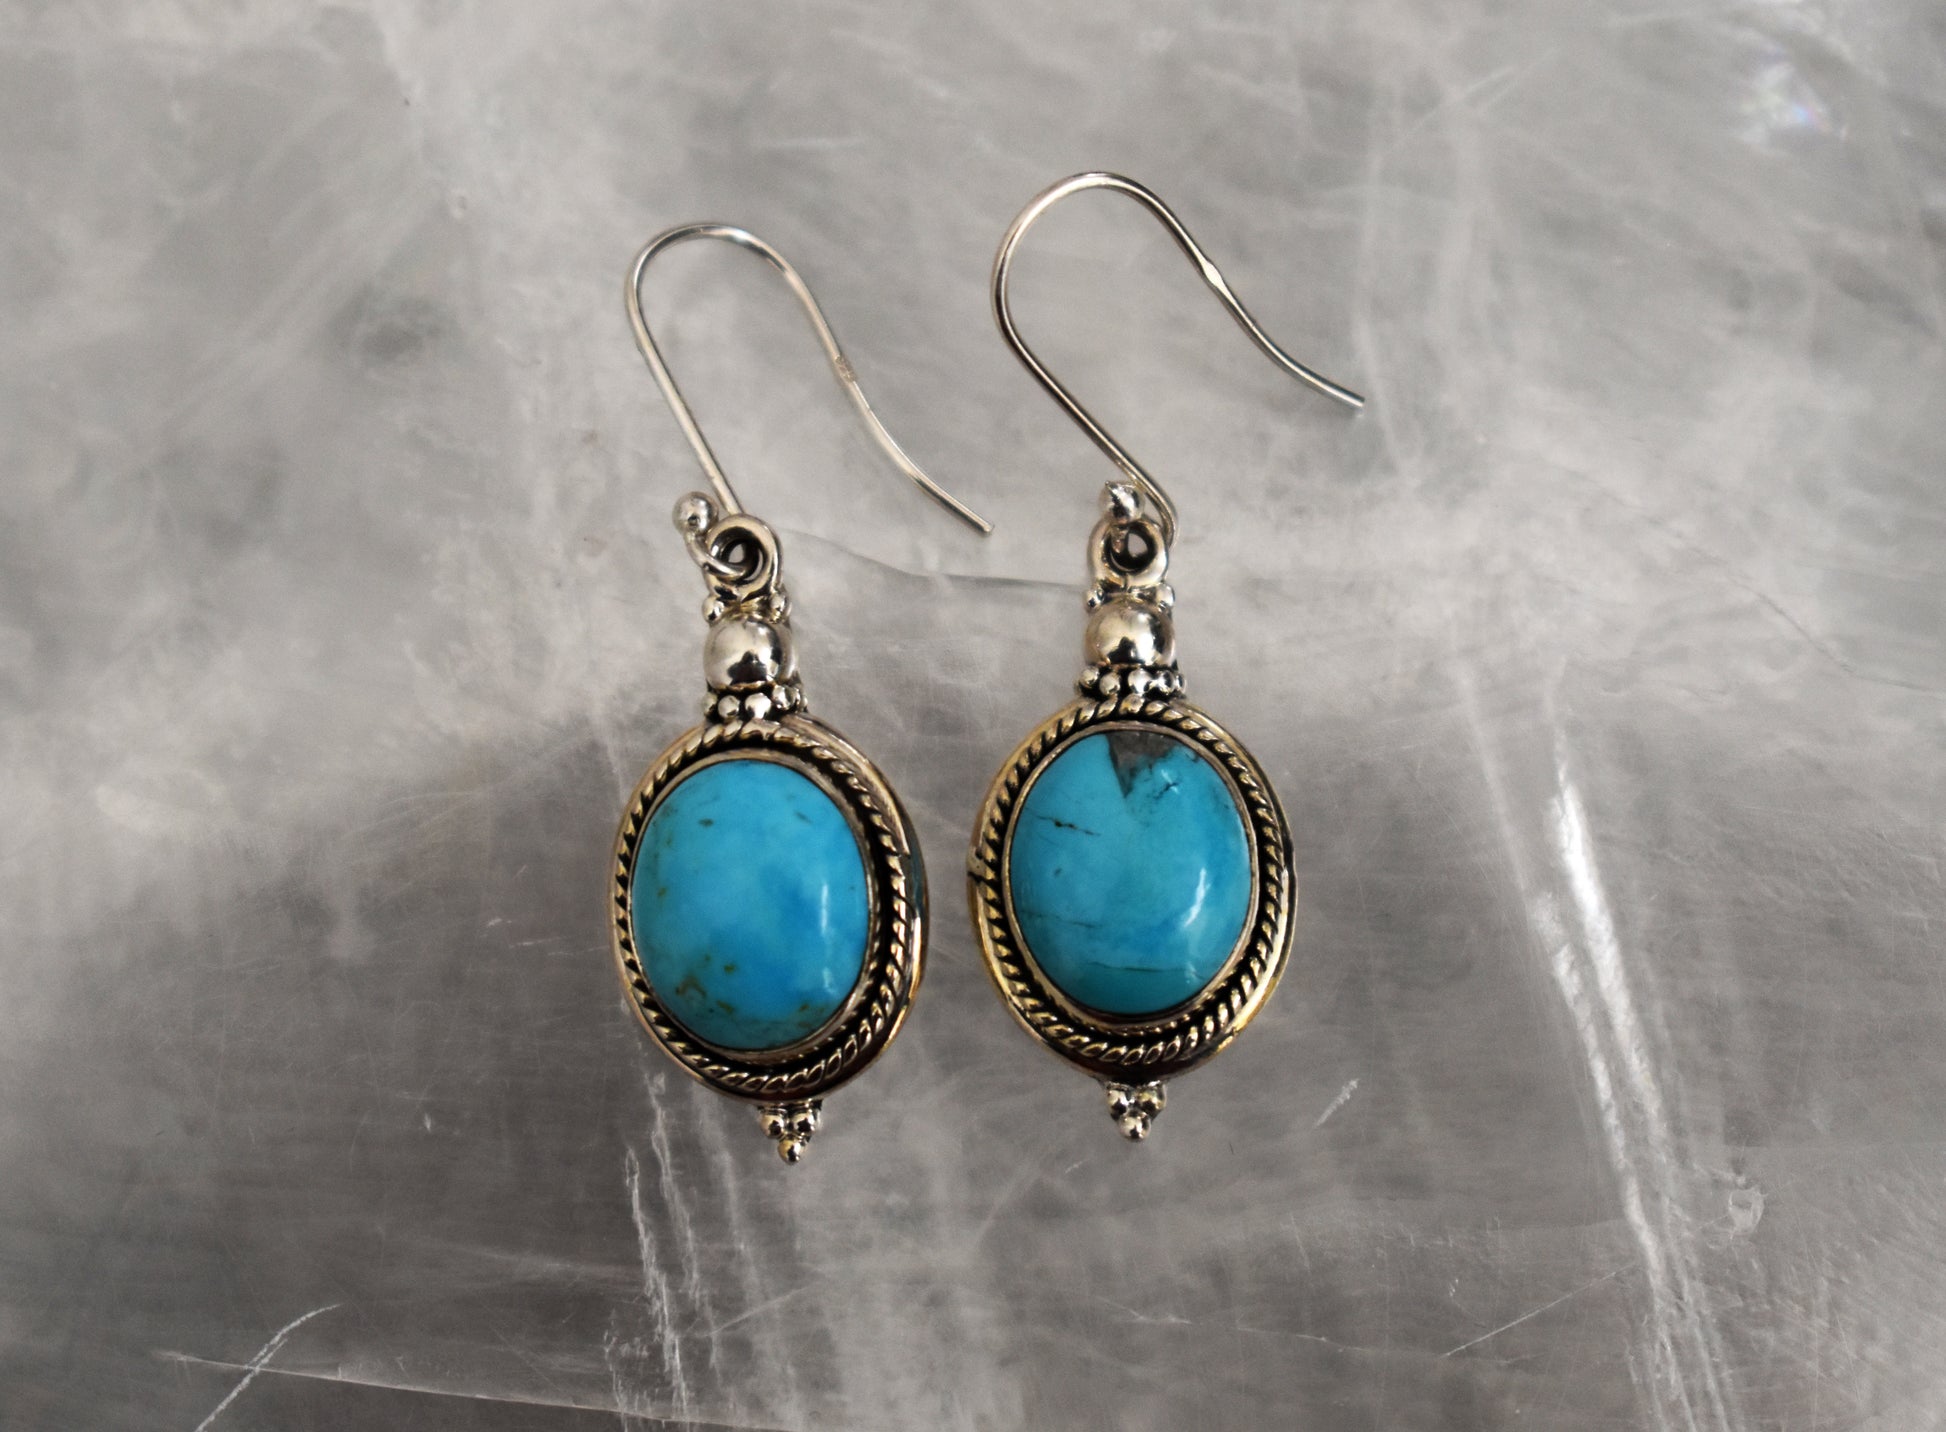 stones-of-transformation - Blue Turquoise Earrings (Sterling Silver) - Stones of Transformation - 